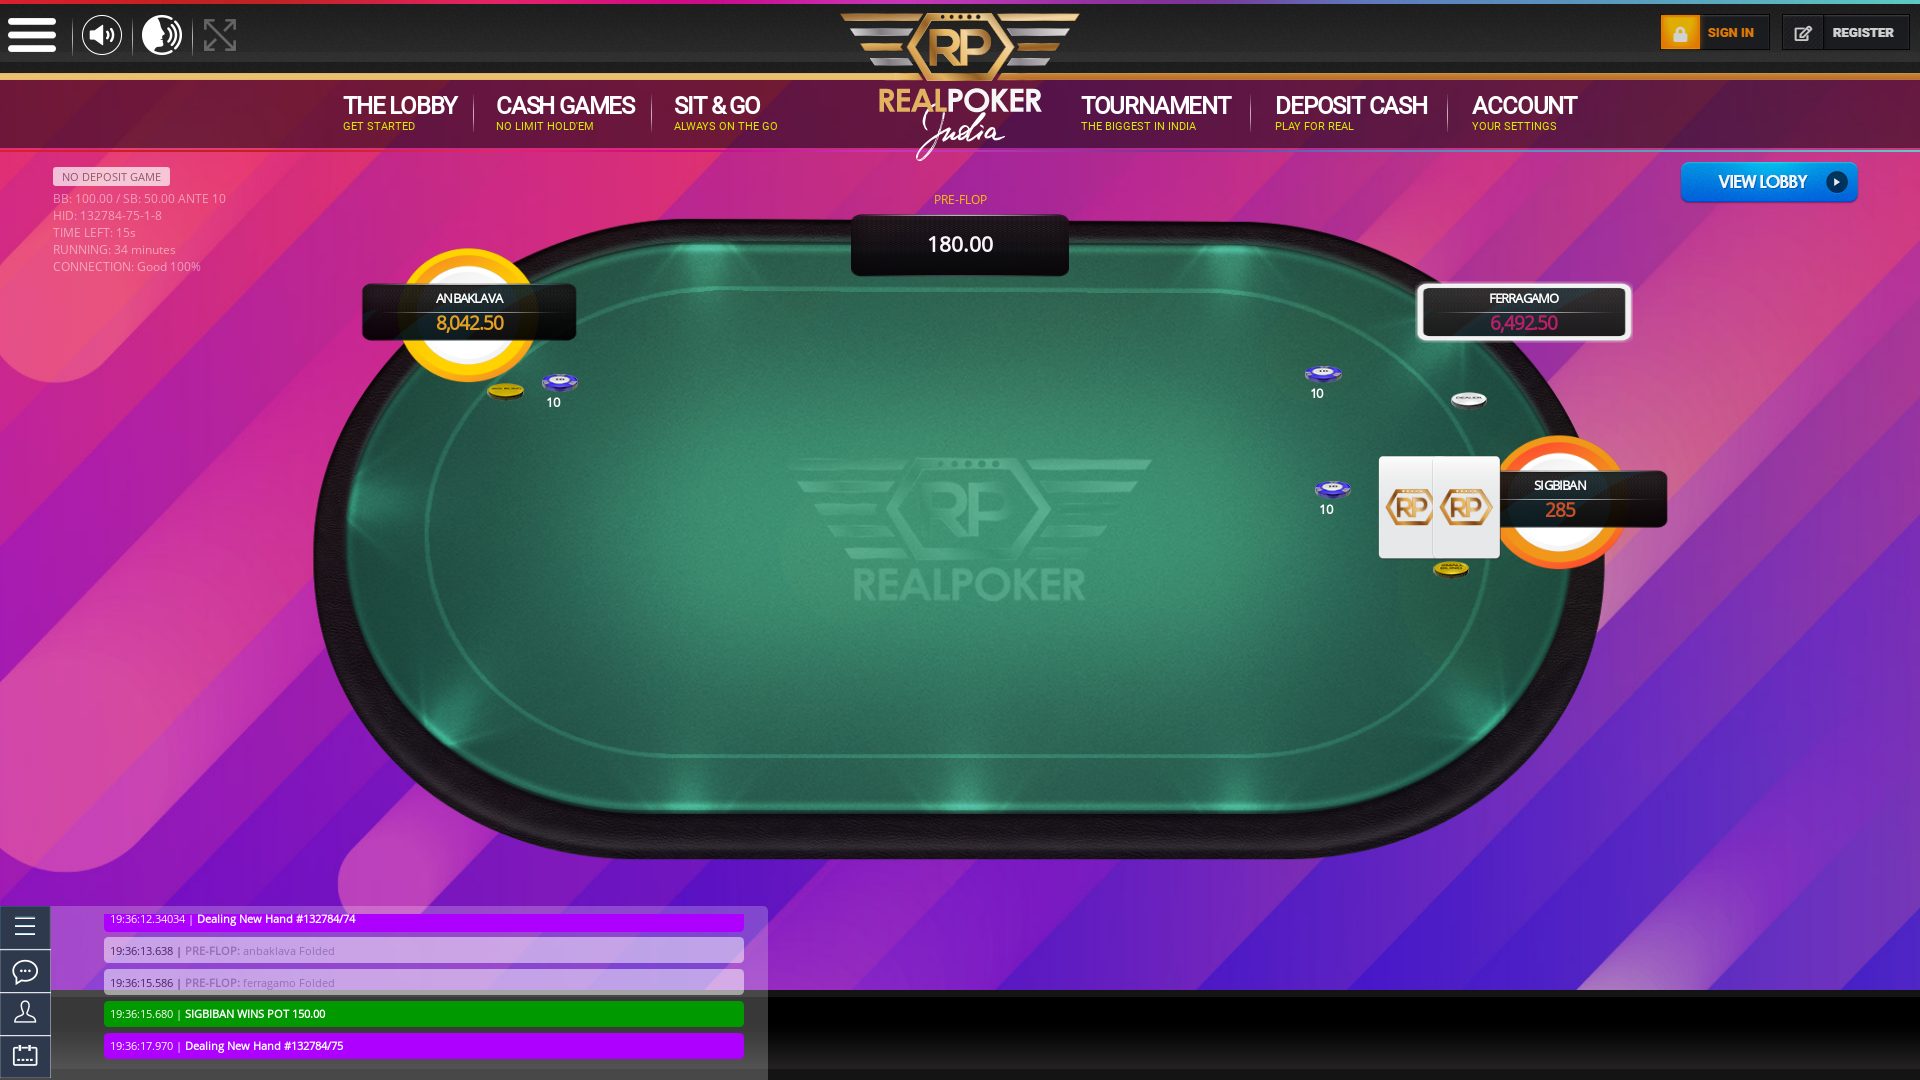 Real poker 10 player table in the 33rd minute